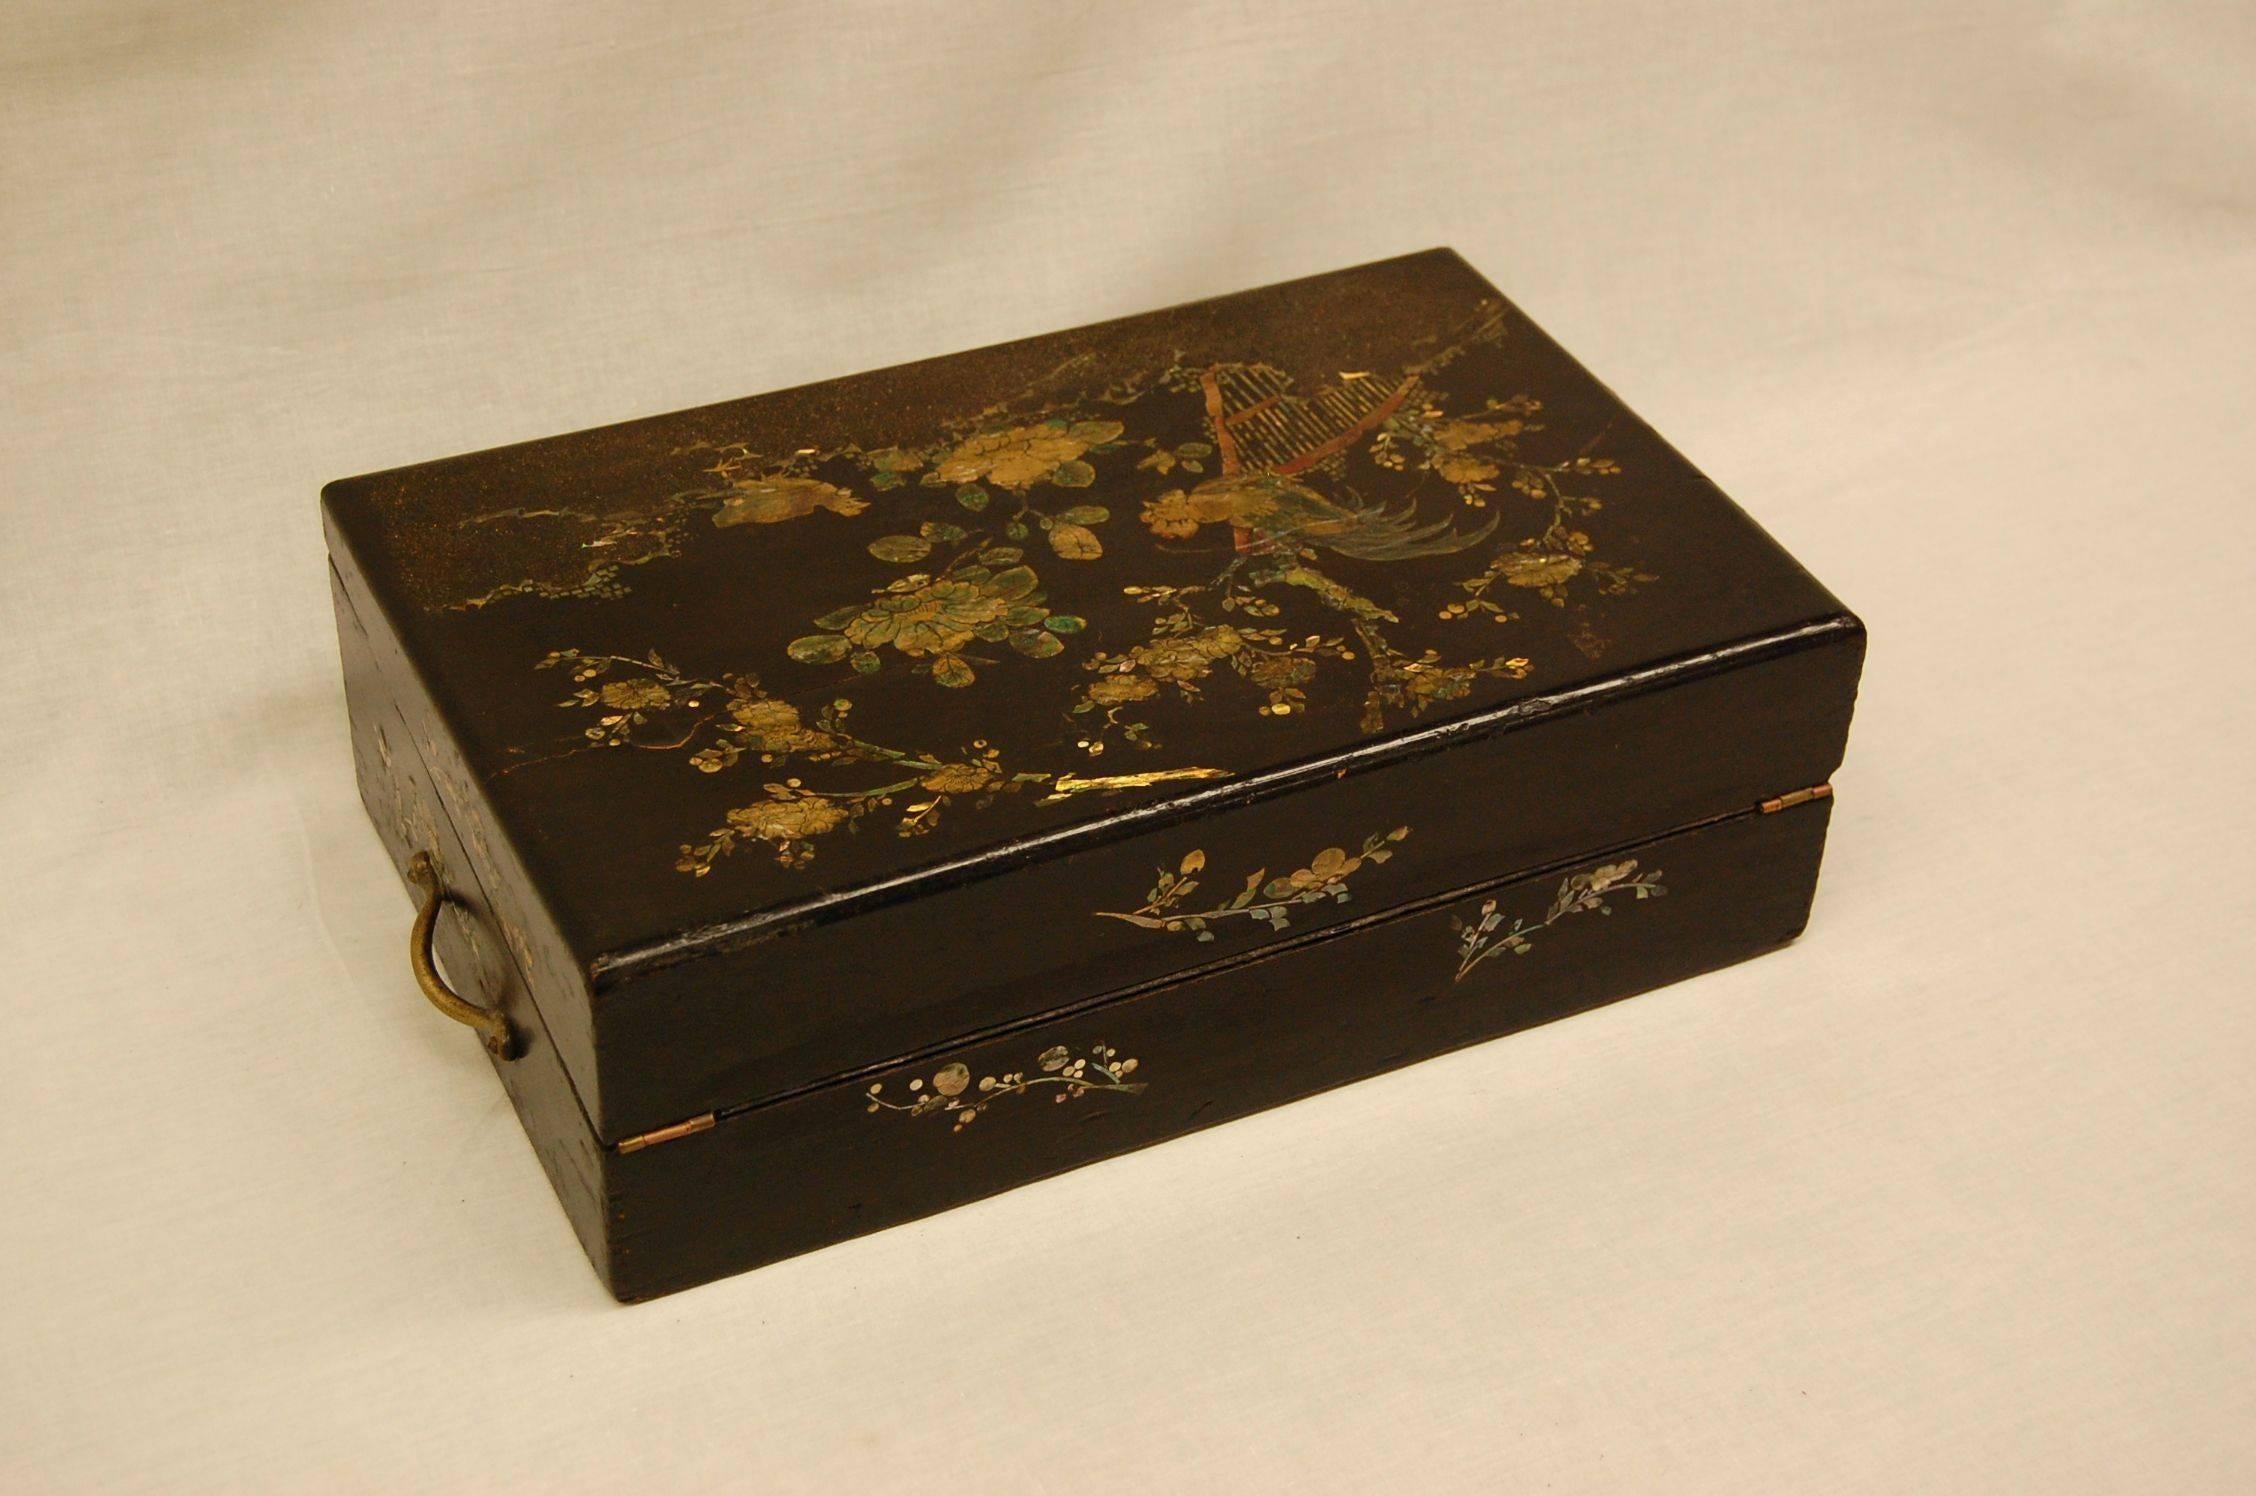 Very nice wooden box in black lacquered finish with original key which still works the lock, circa 1850. Detailed mother-of-Pearl inlay of roosters and flowering trees. Interior lid and tray functions perfectly. Either Japanese or Chinese in origin.